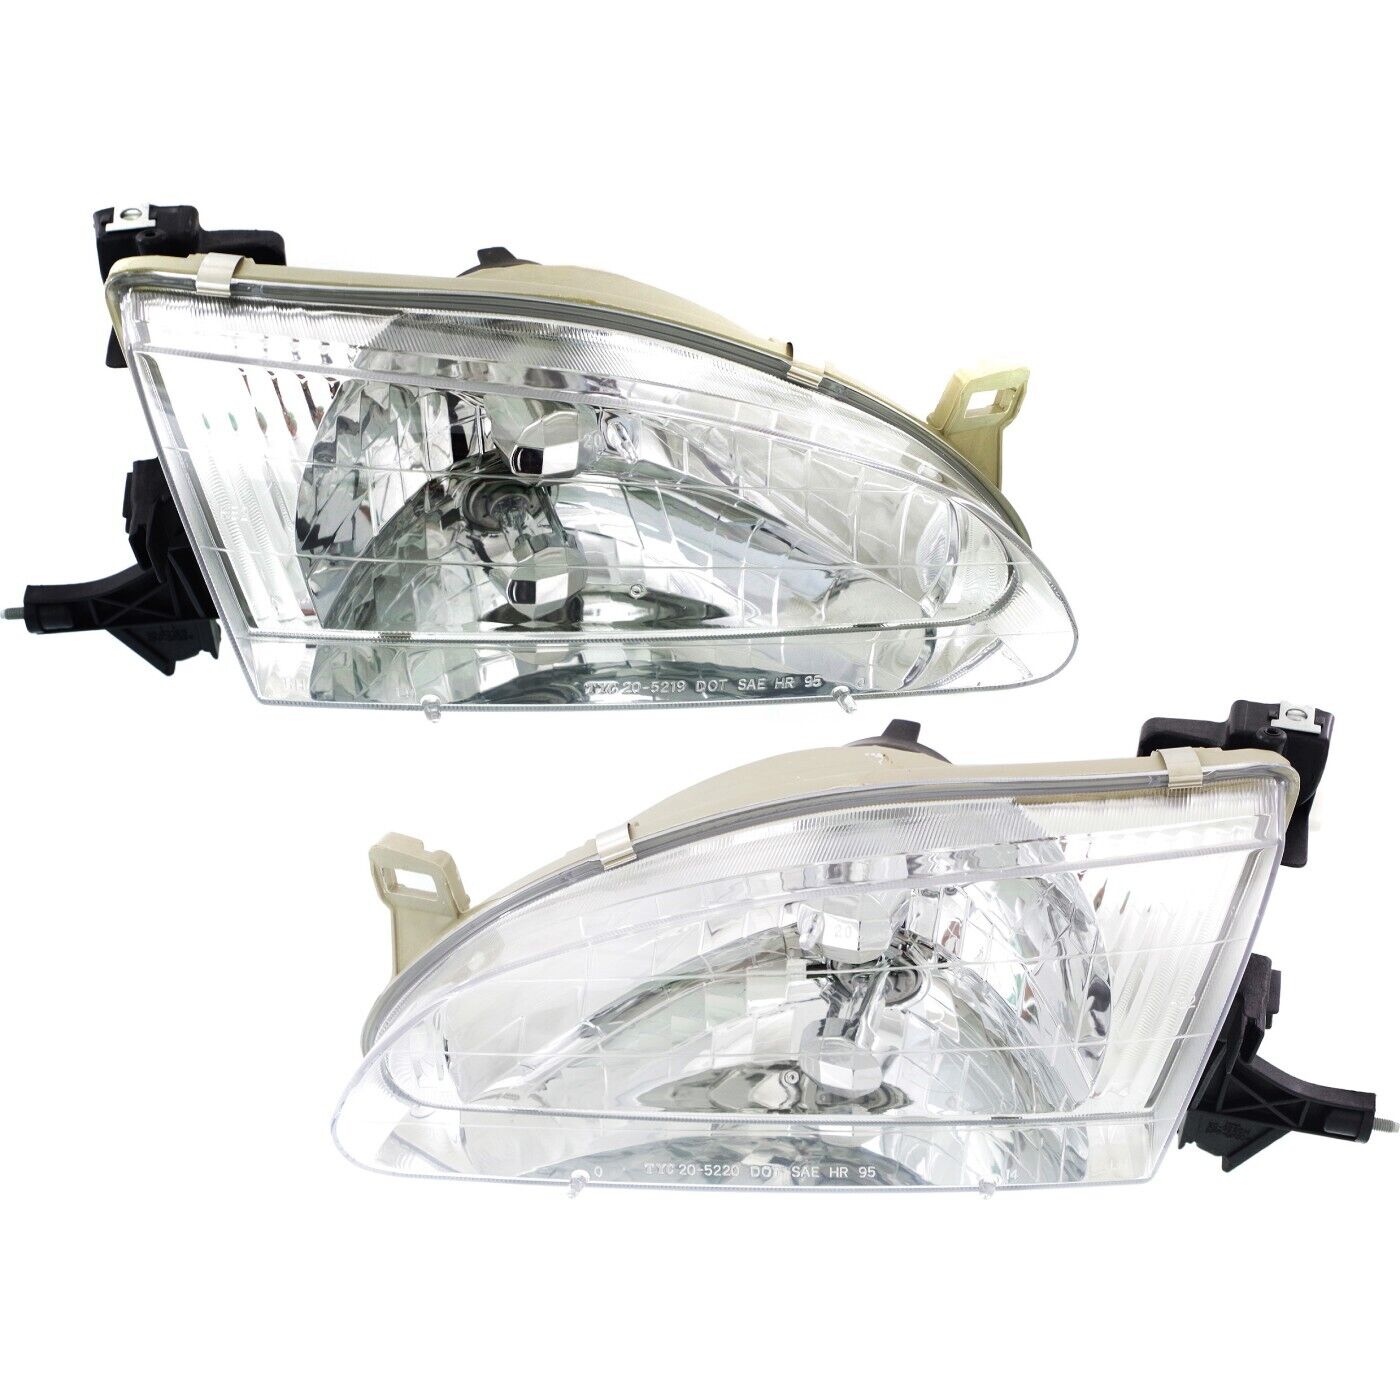 Headlight Set For 98-2000 Toyota Corolla Sedan Left and Right With Bulb 2Pc